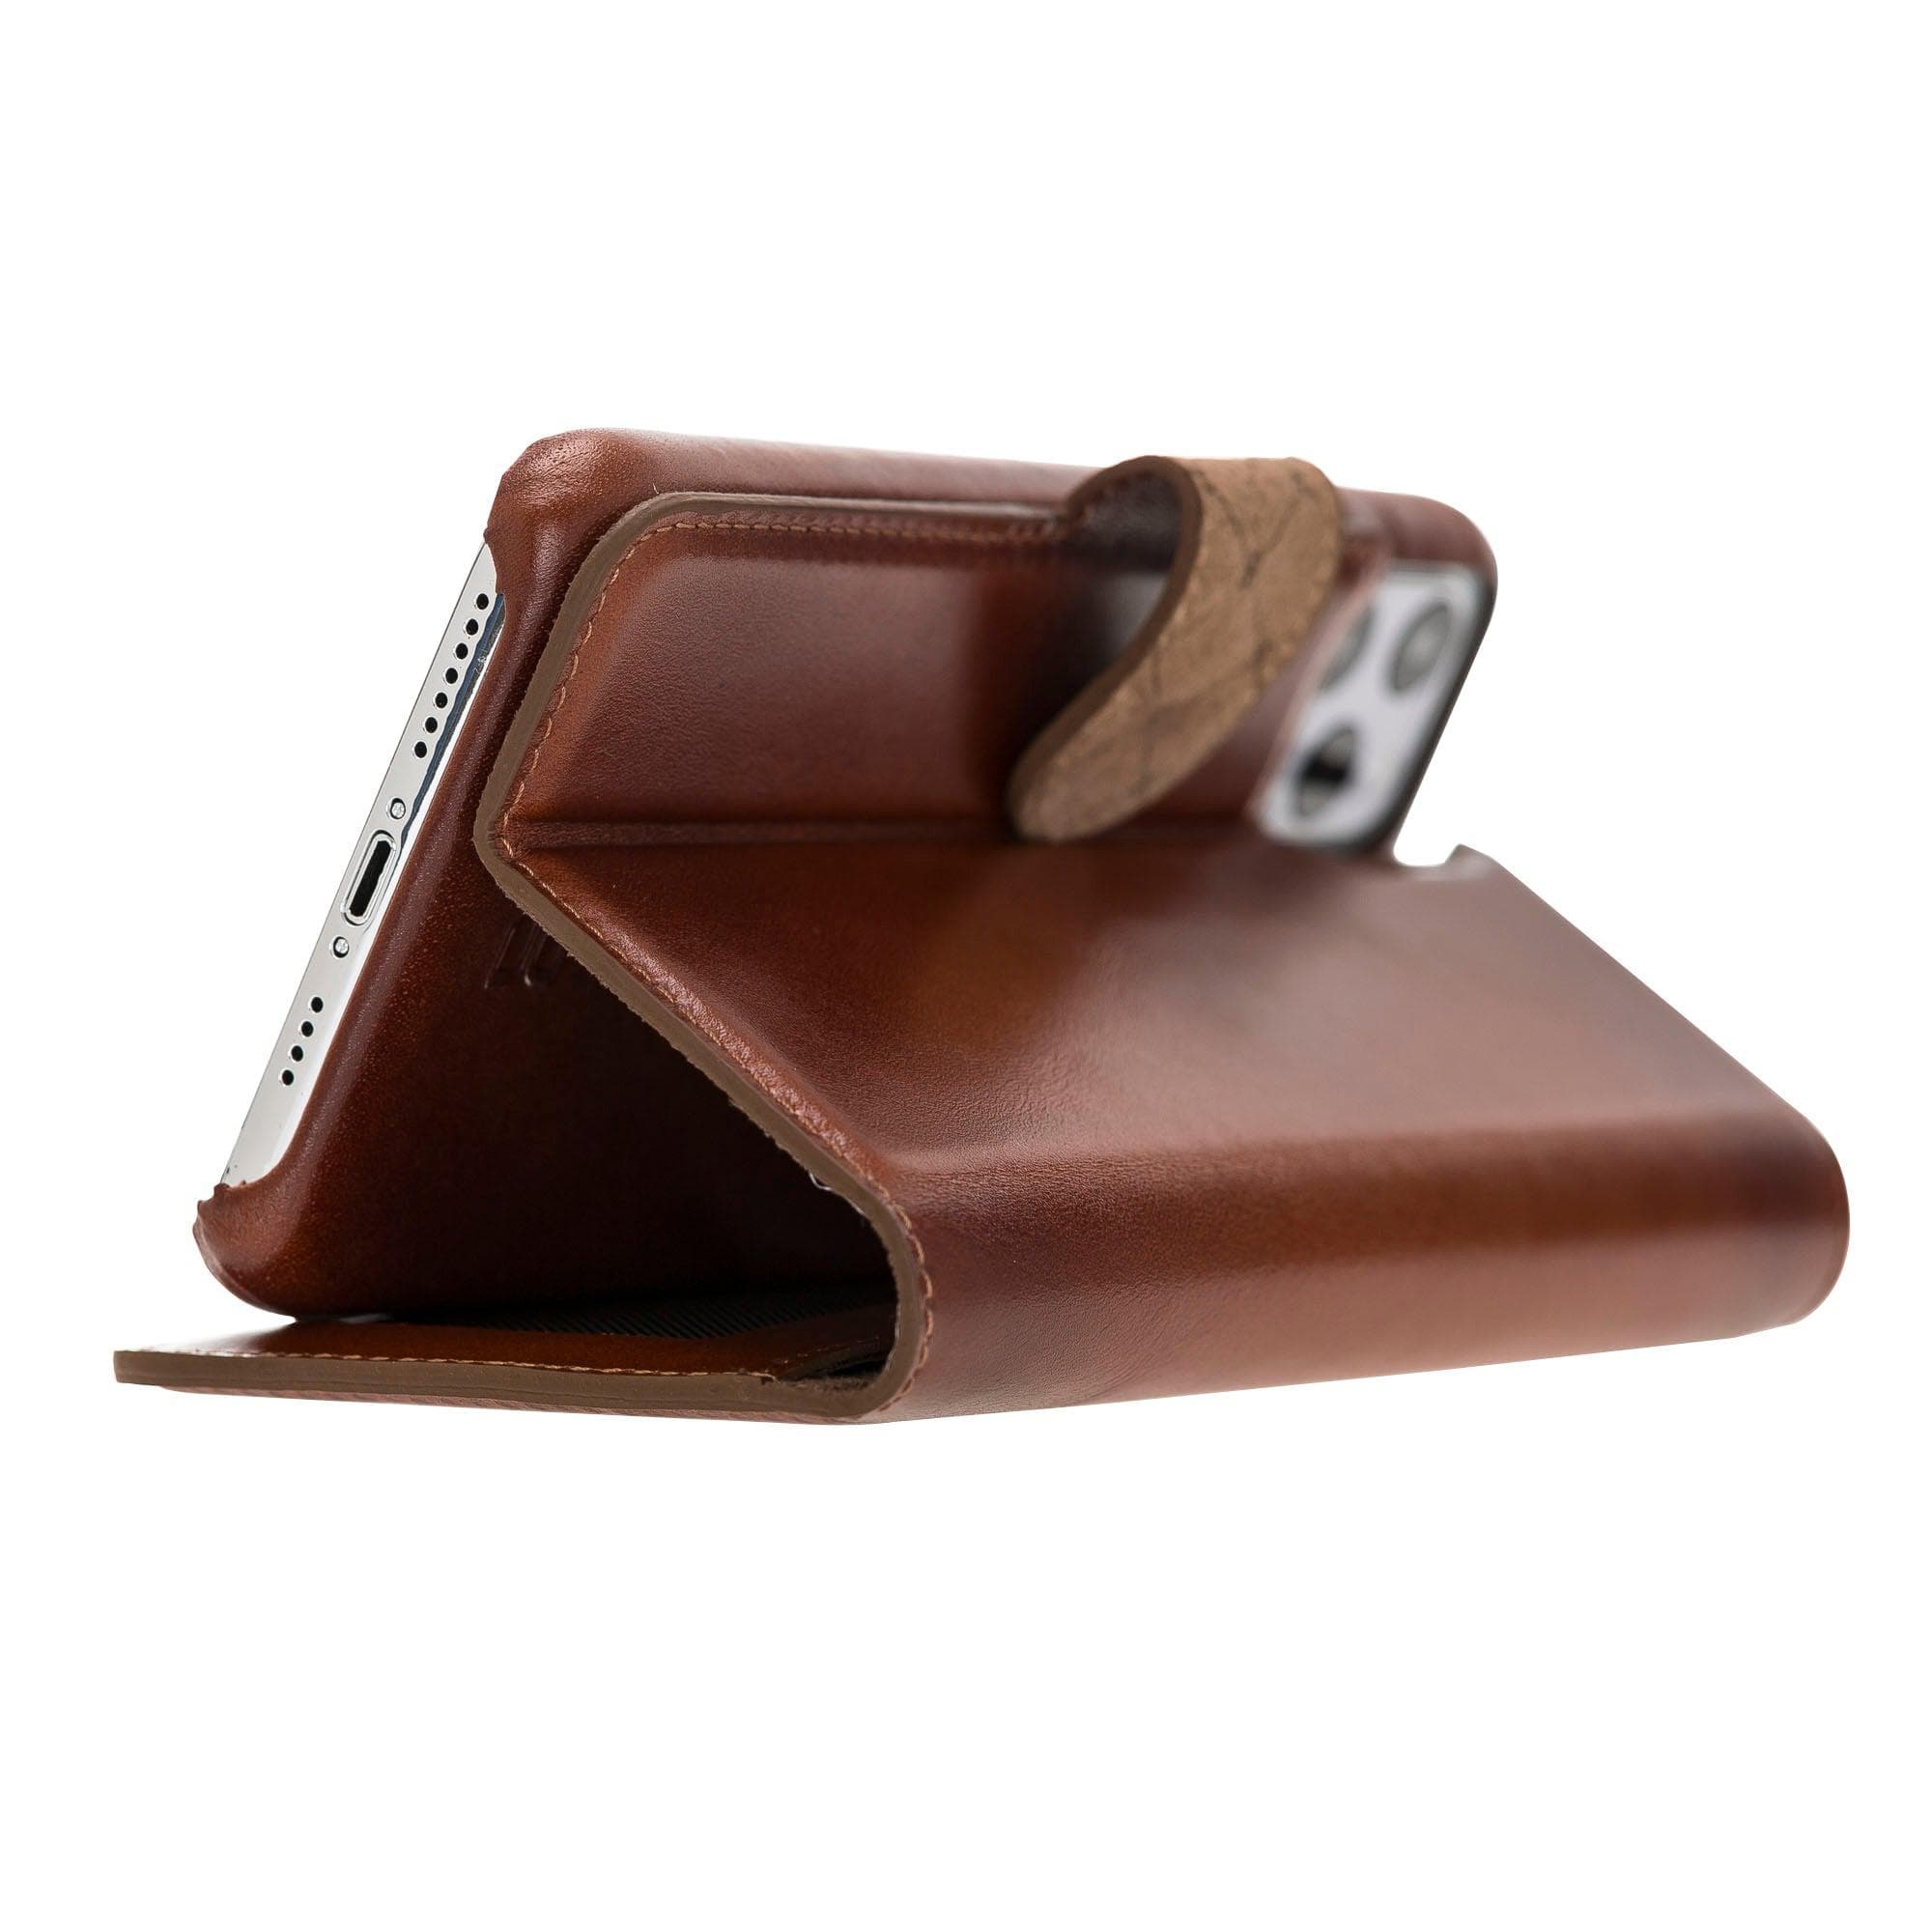 Detachable Fully Covering Leather Wallet Case For Apple iPhone 11 Series Bouletta LTD